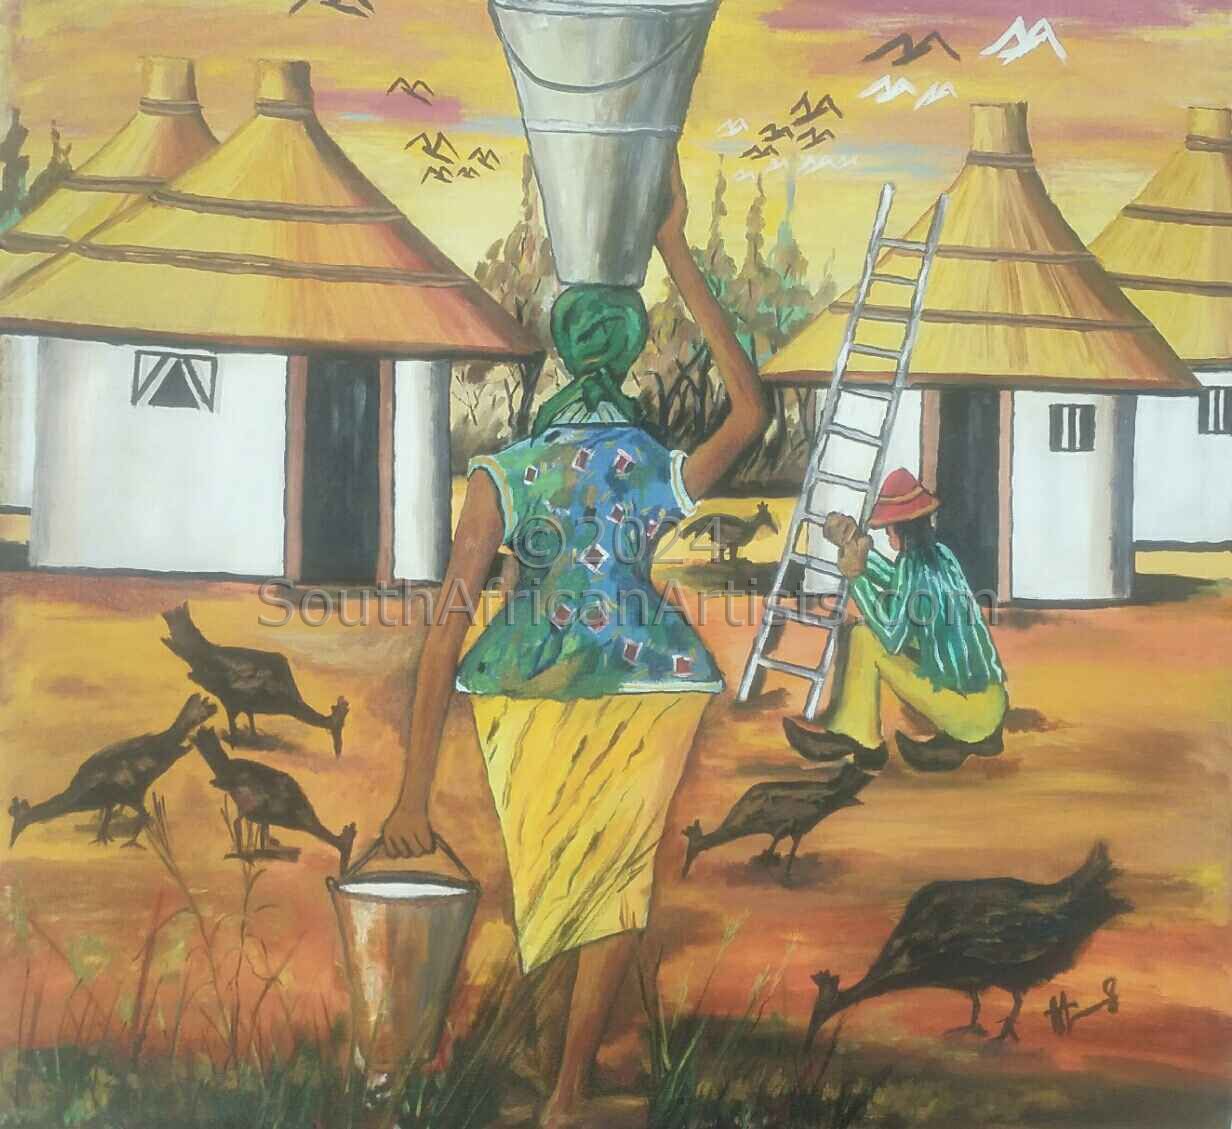 African Tradition 2